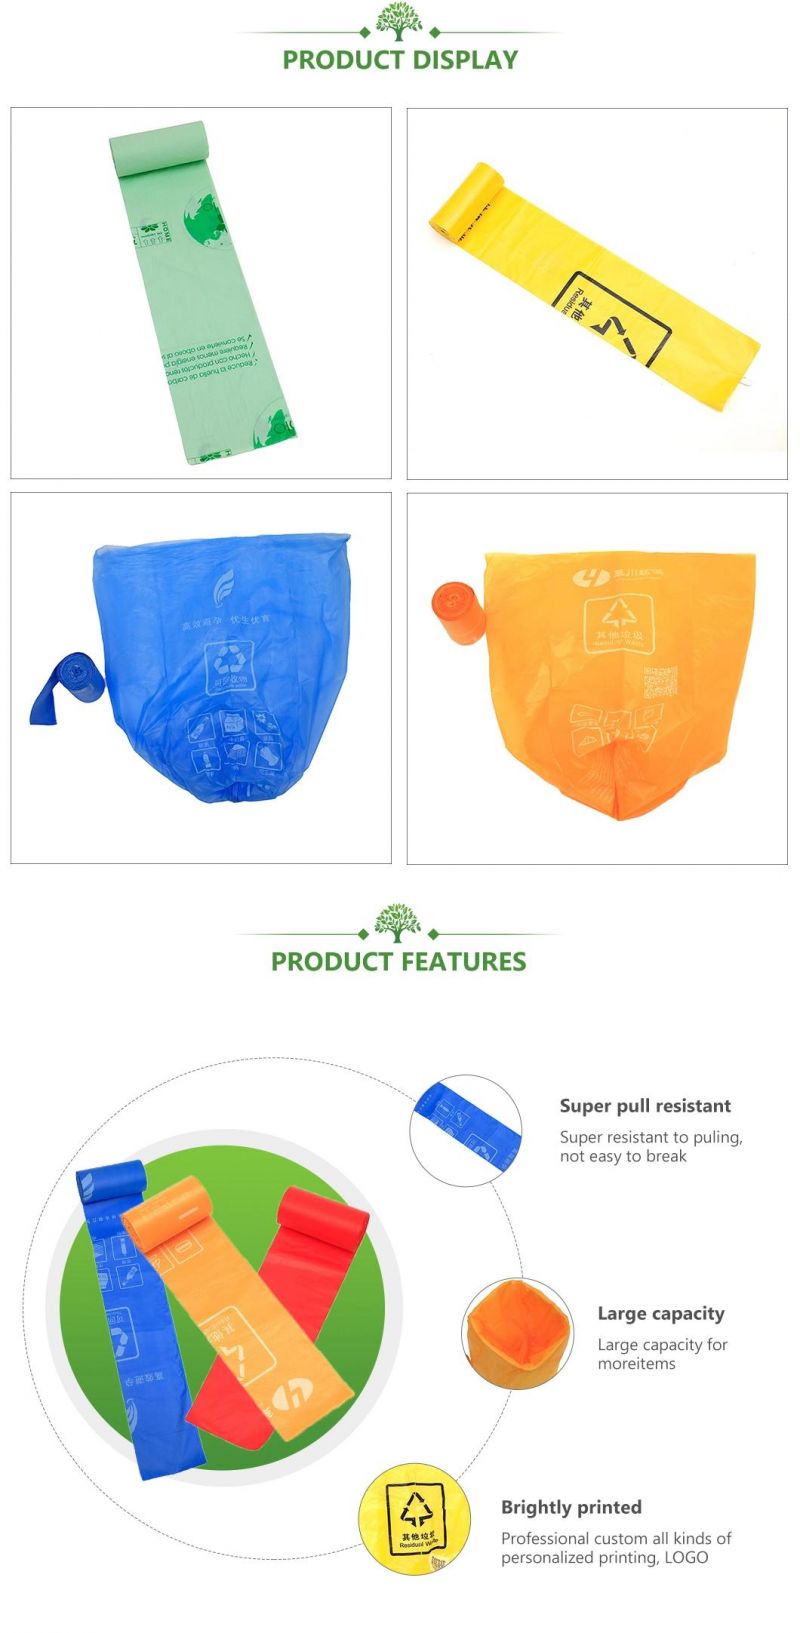 Biodegradable Bags Compostable Trash Waste Bags Manufacturer with FDA, Brc, BSCI, CE, Grs, Bpi, Seeding